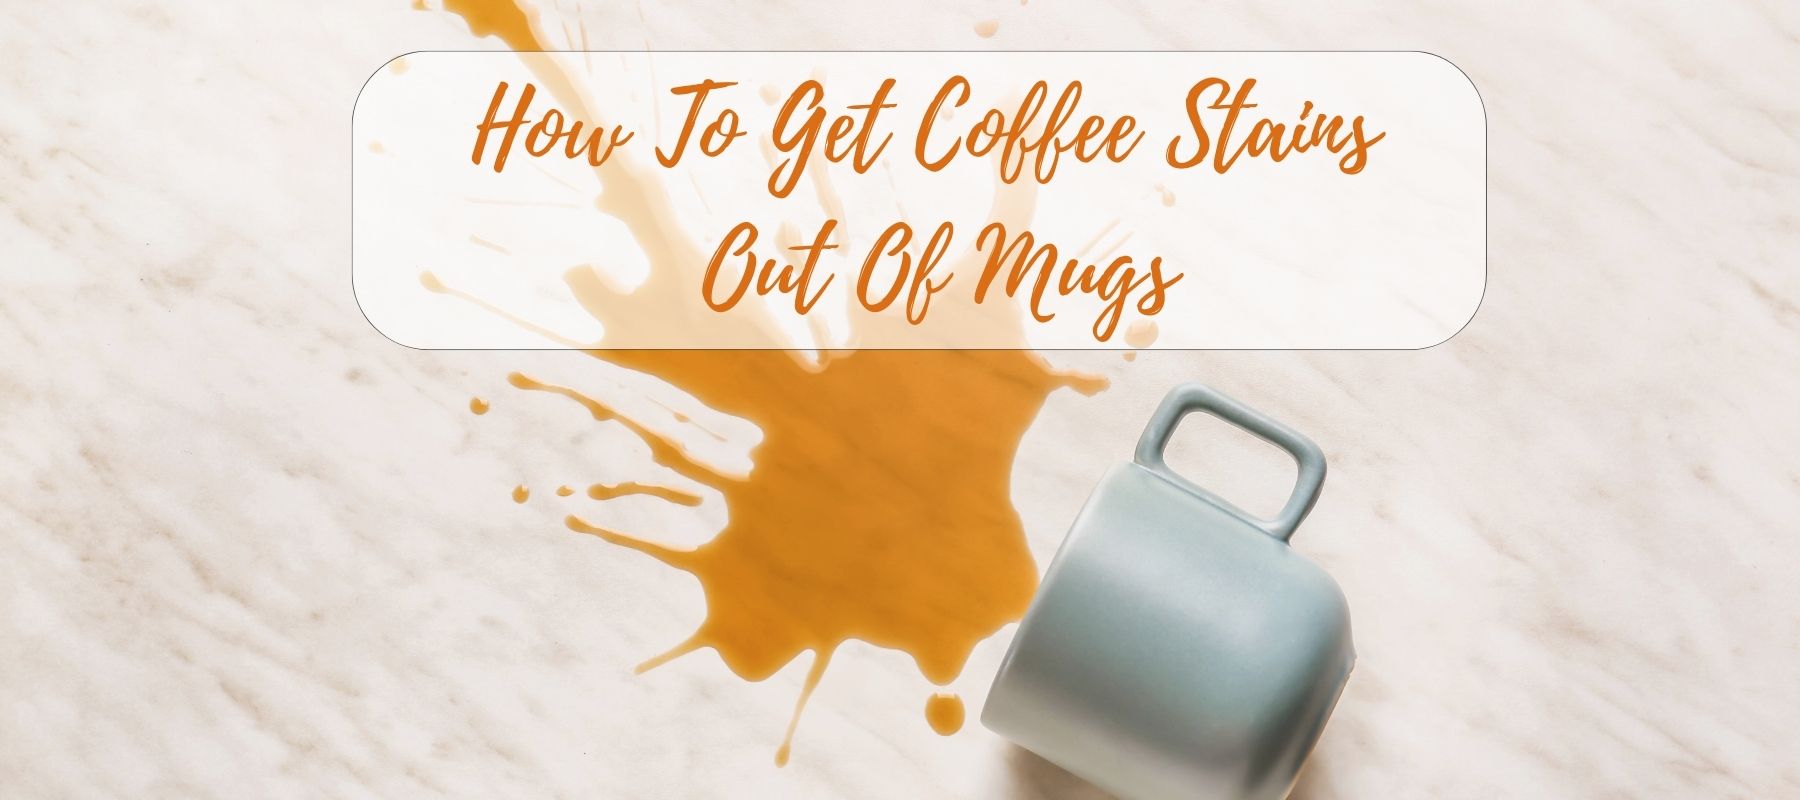 How-To-Get-Coffee-Stains-Out-Of-Mugs